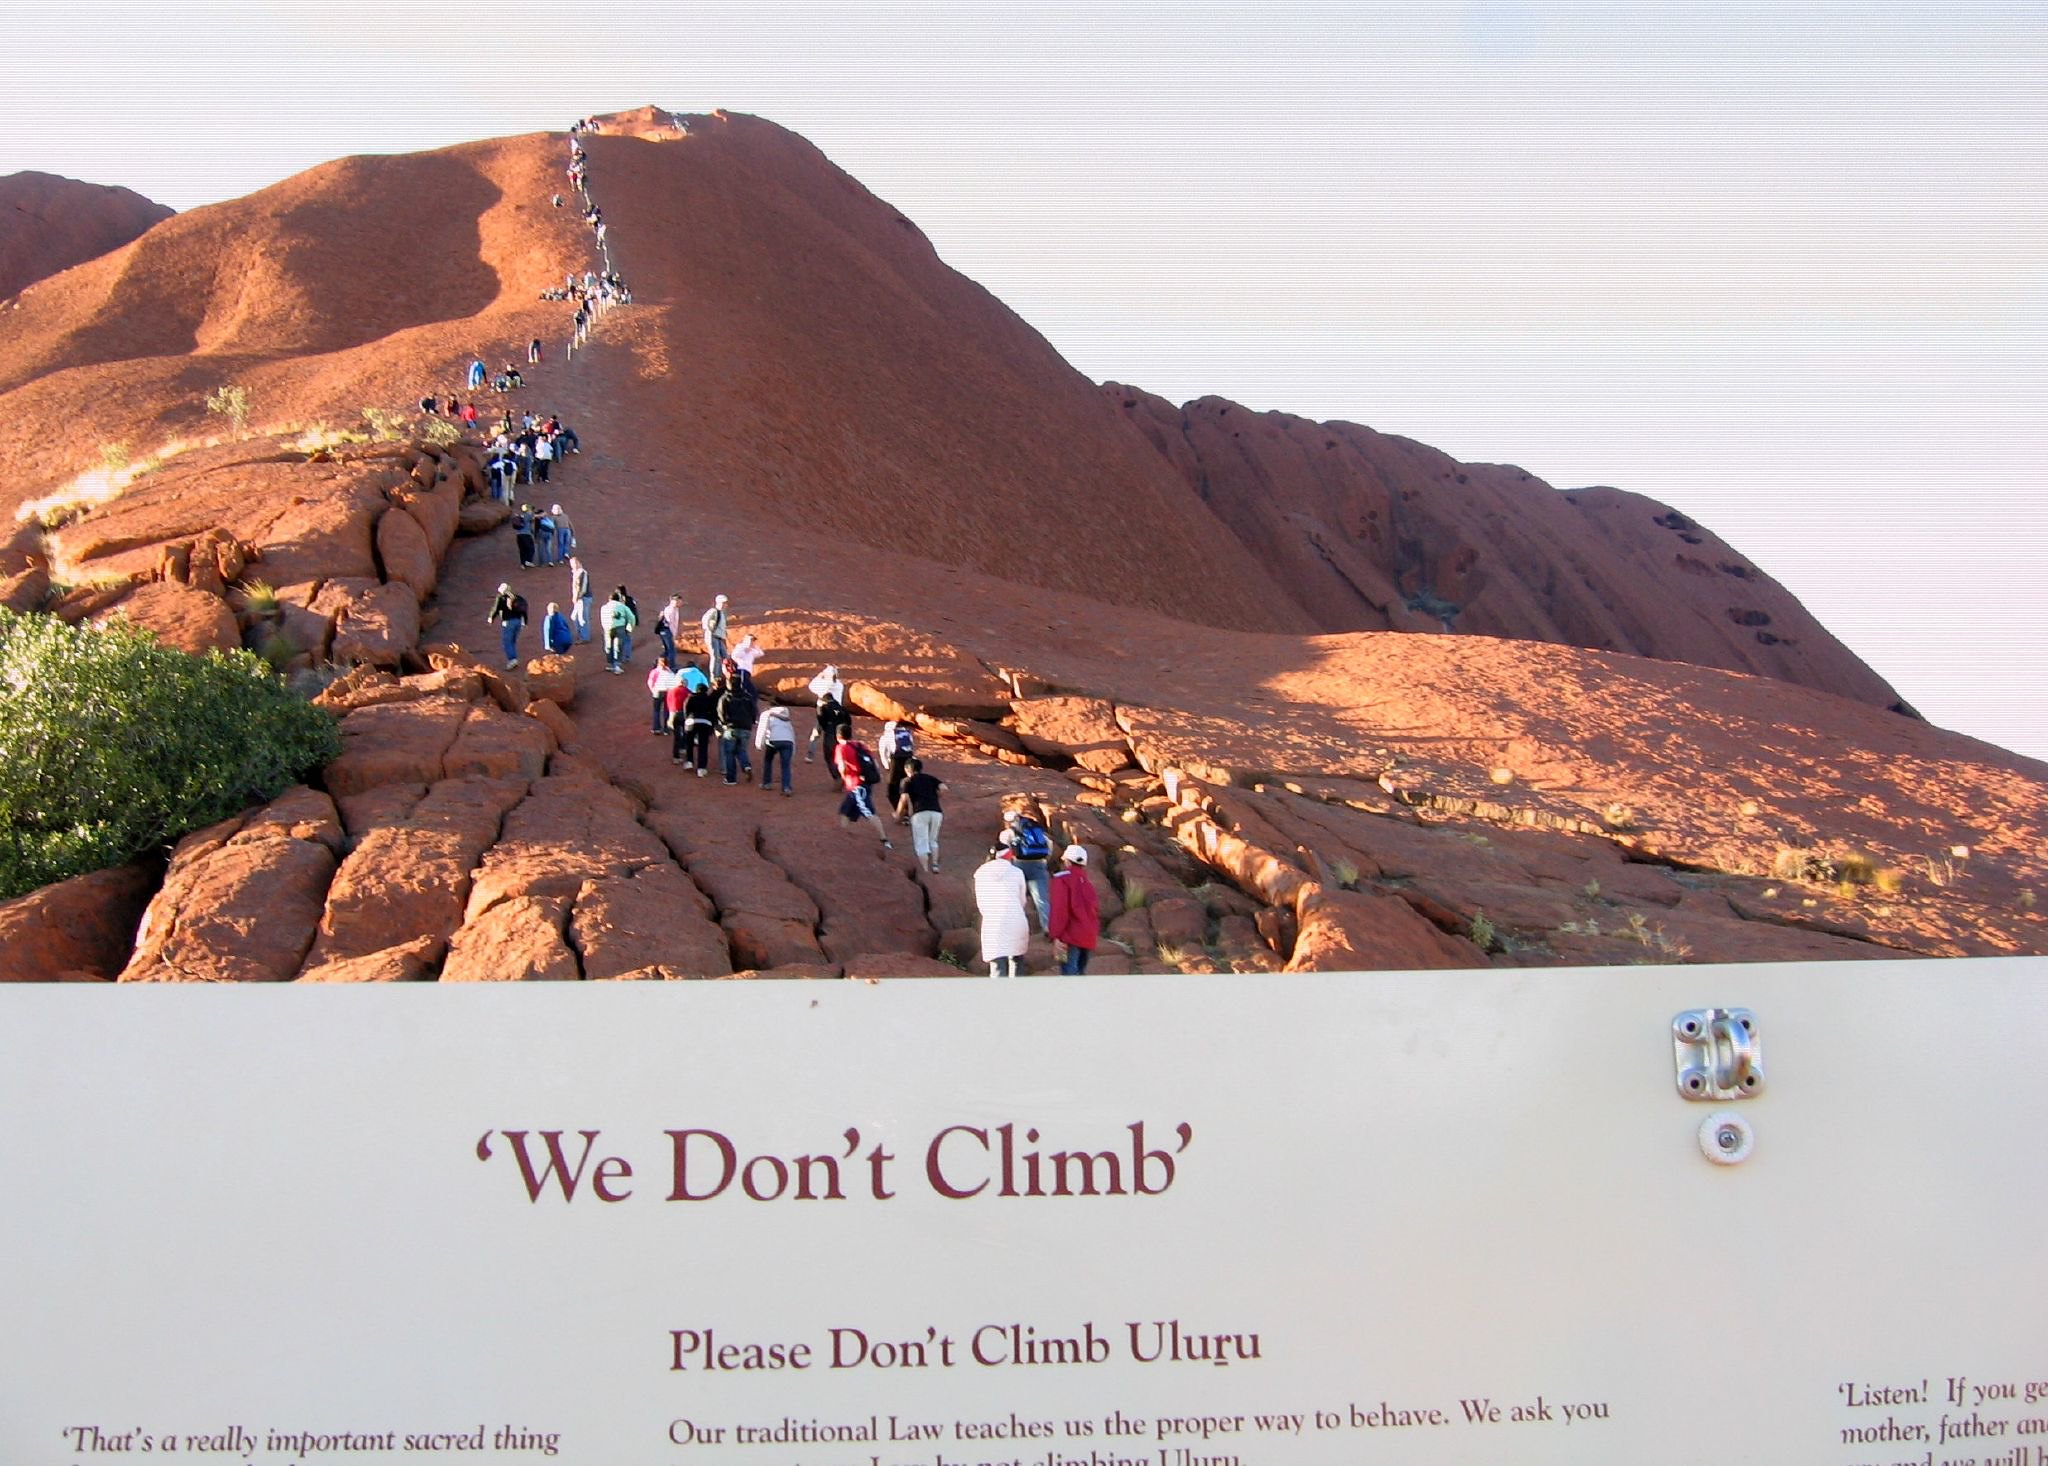 Dozens of people hike over a reddish rock formation.